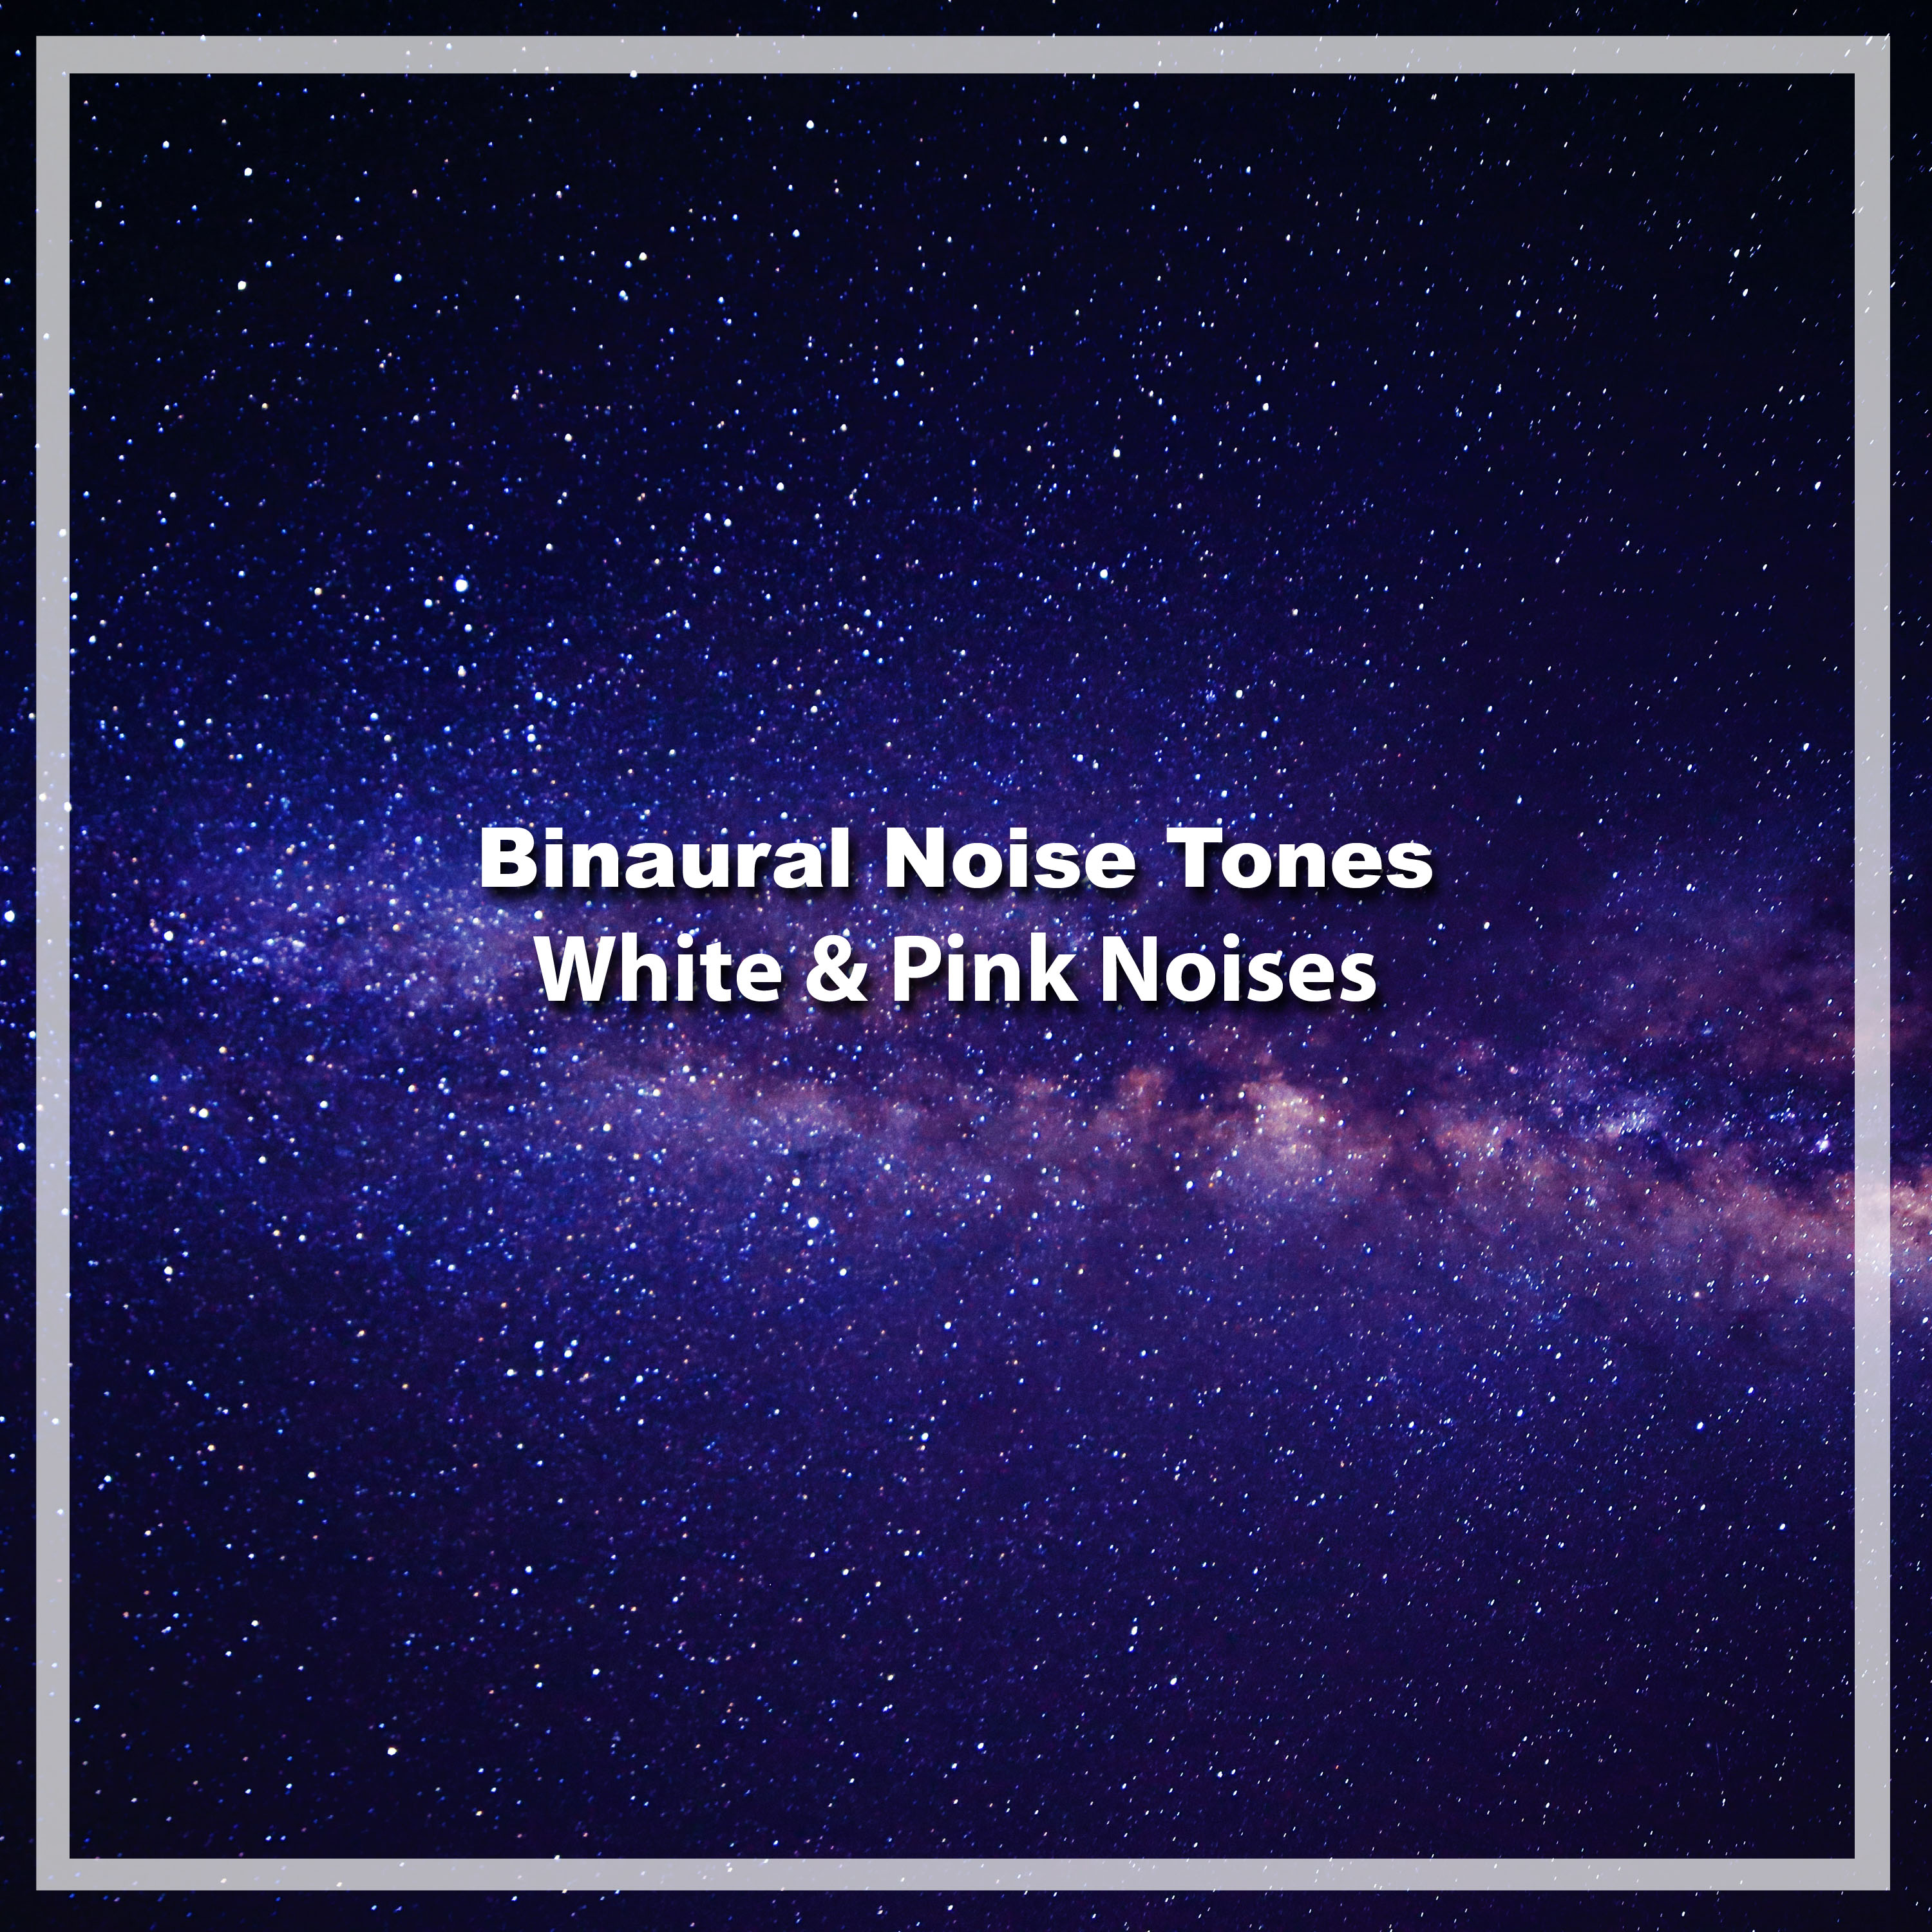 13 Binaural Noise Tones: White and Pink Noises